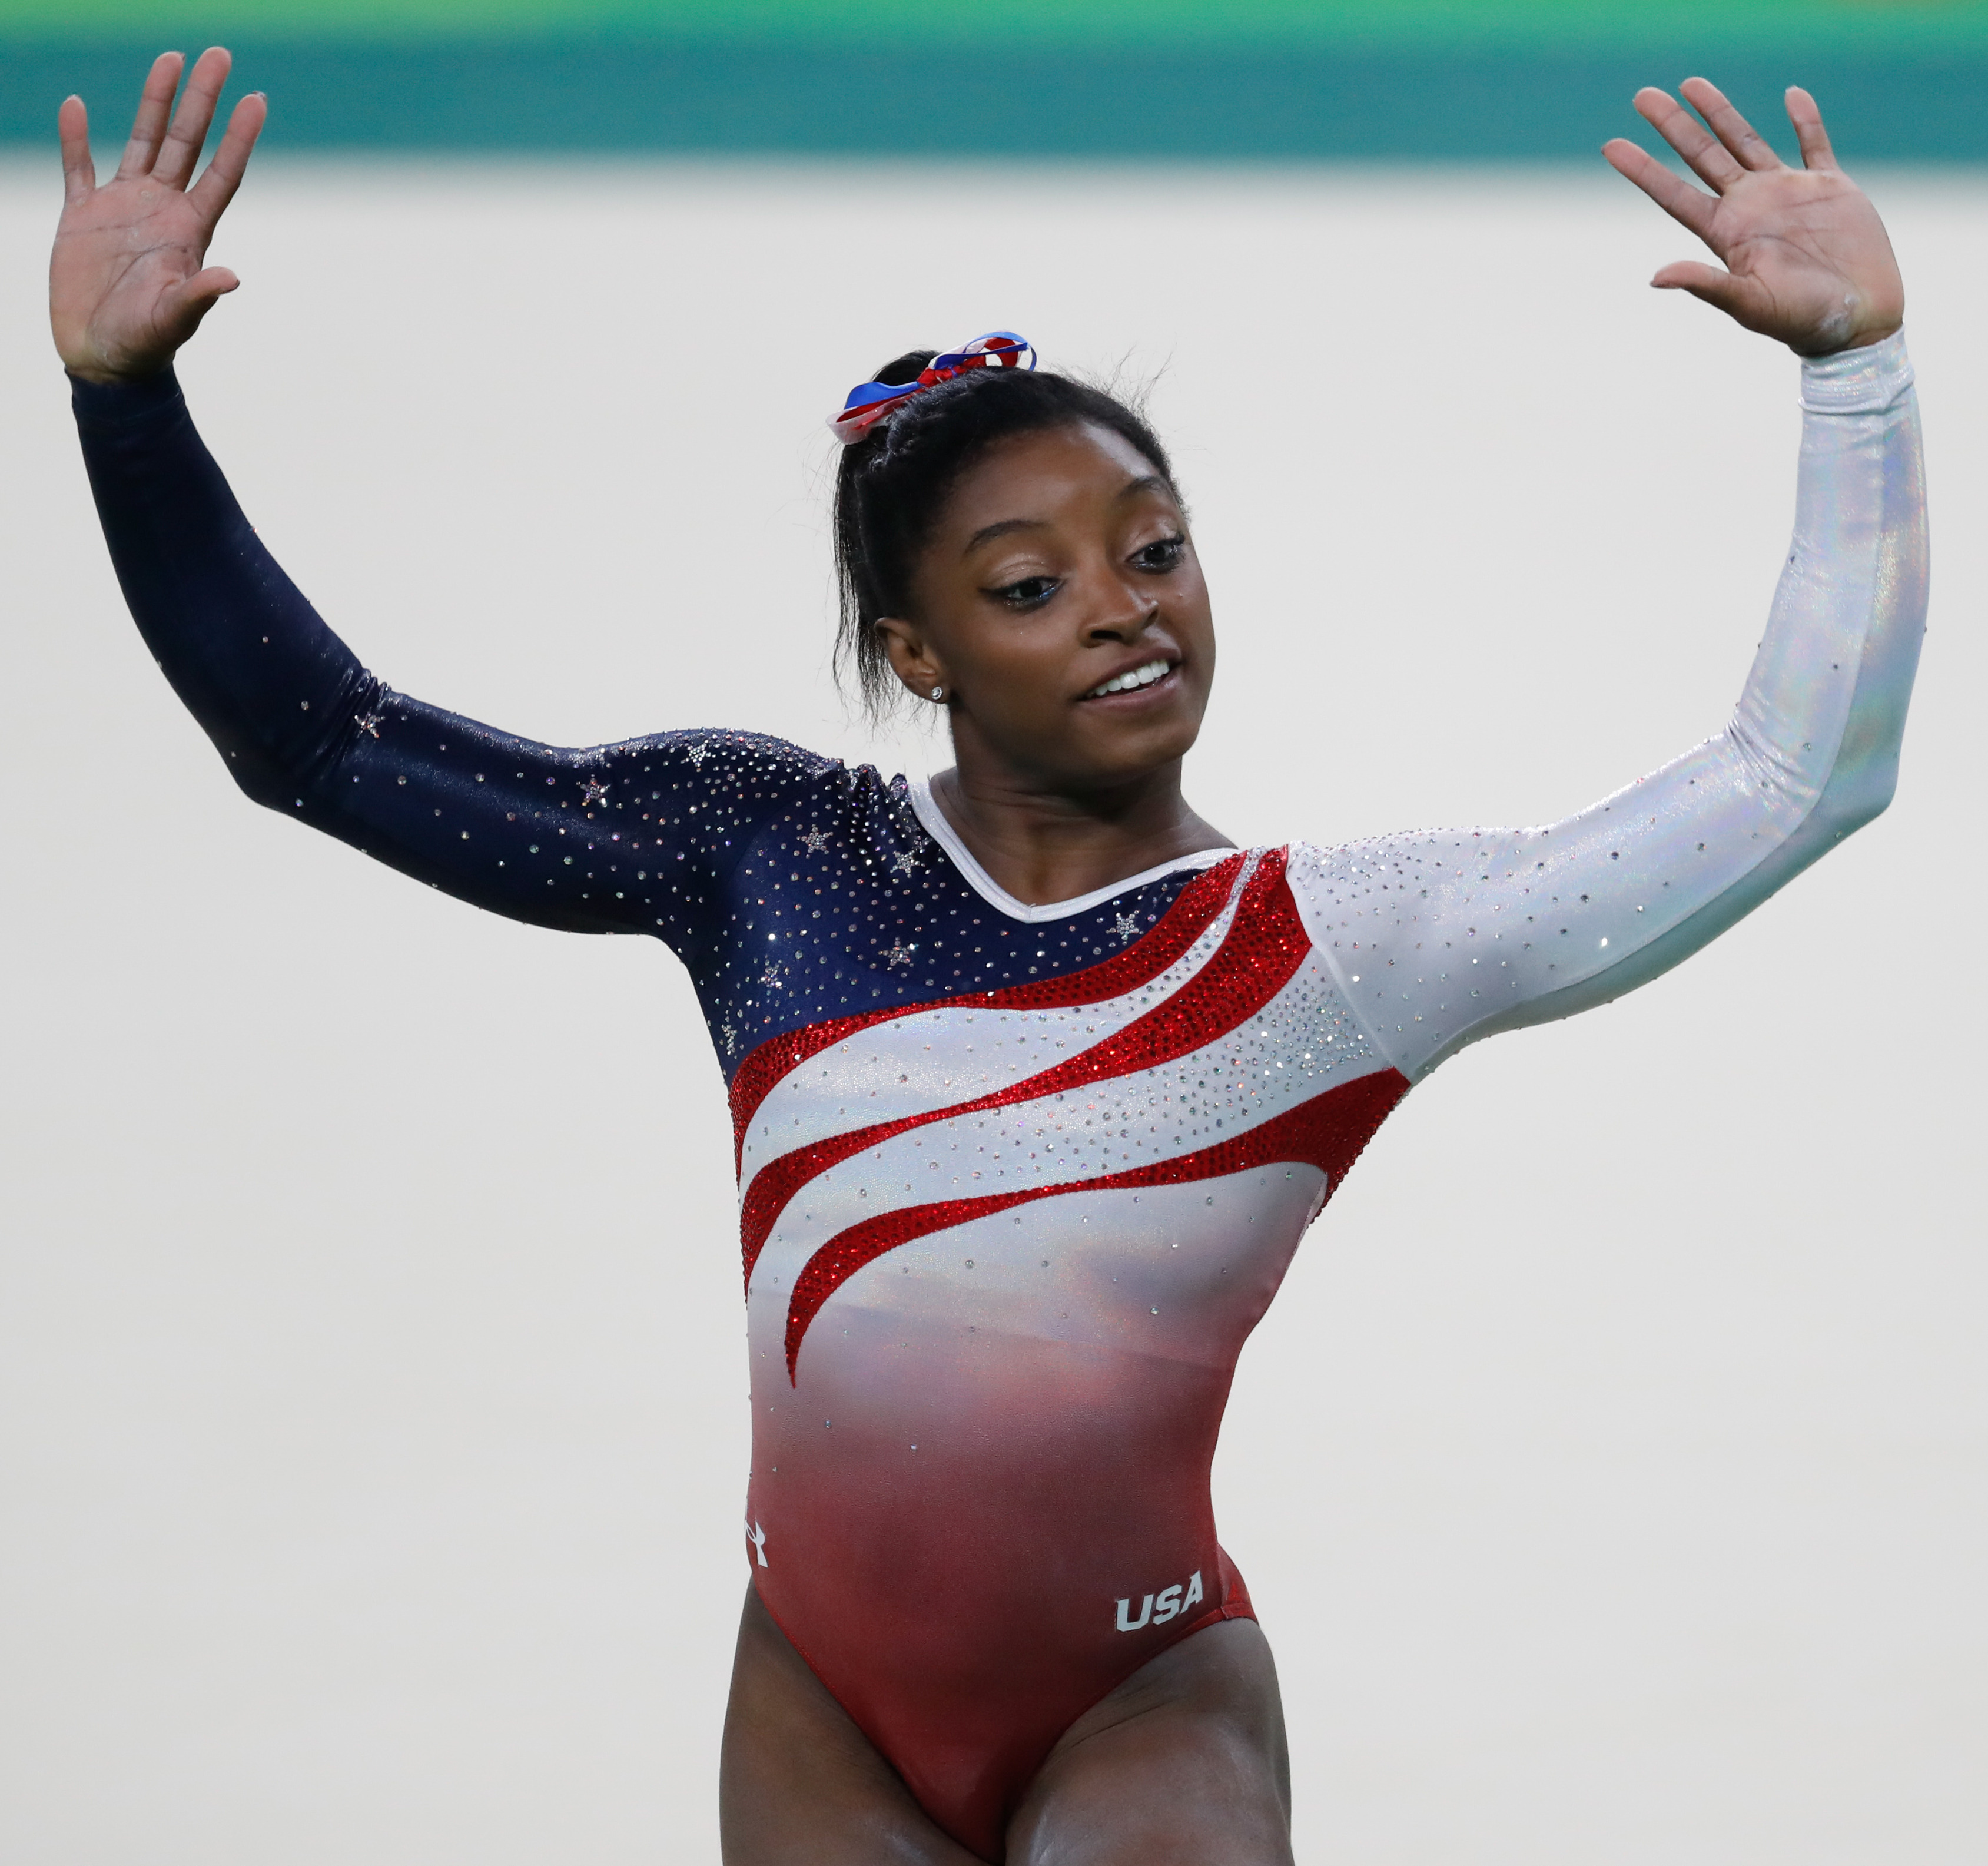 Biles, Phelps Among USOC Nominees for Rio 2016 Awards